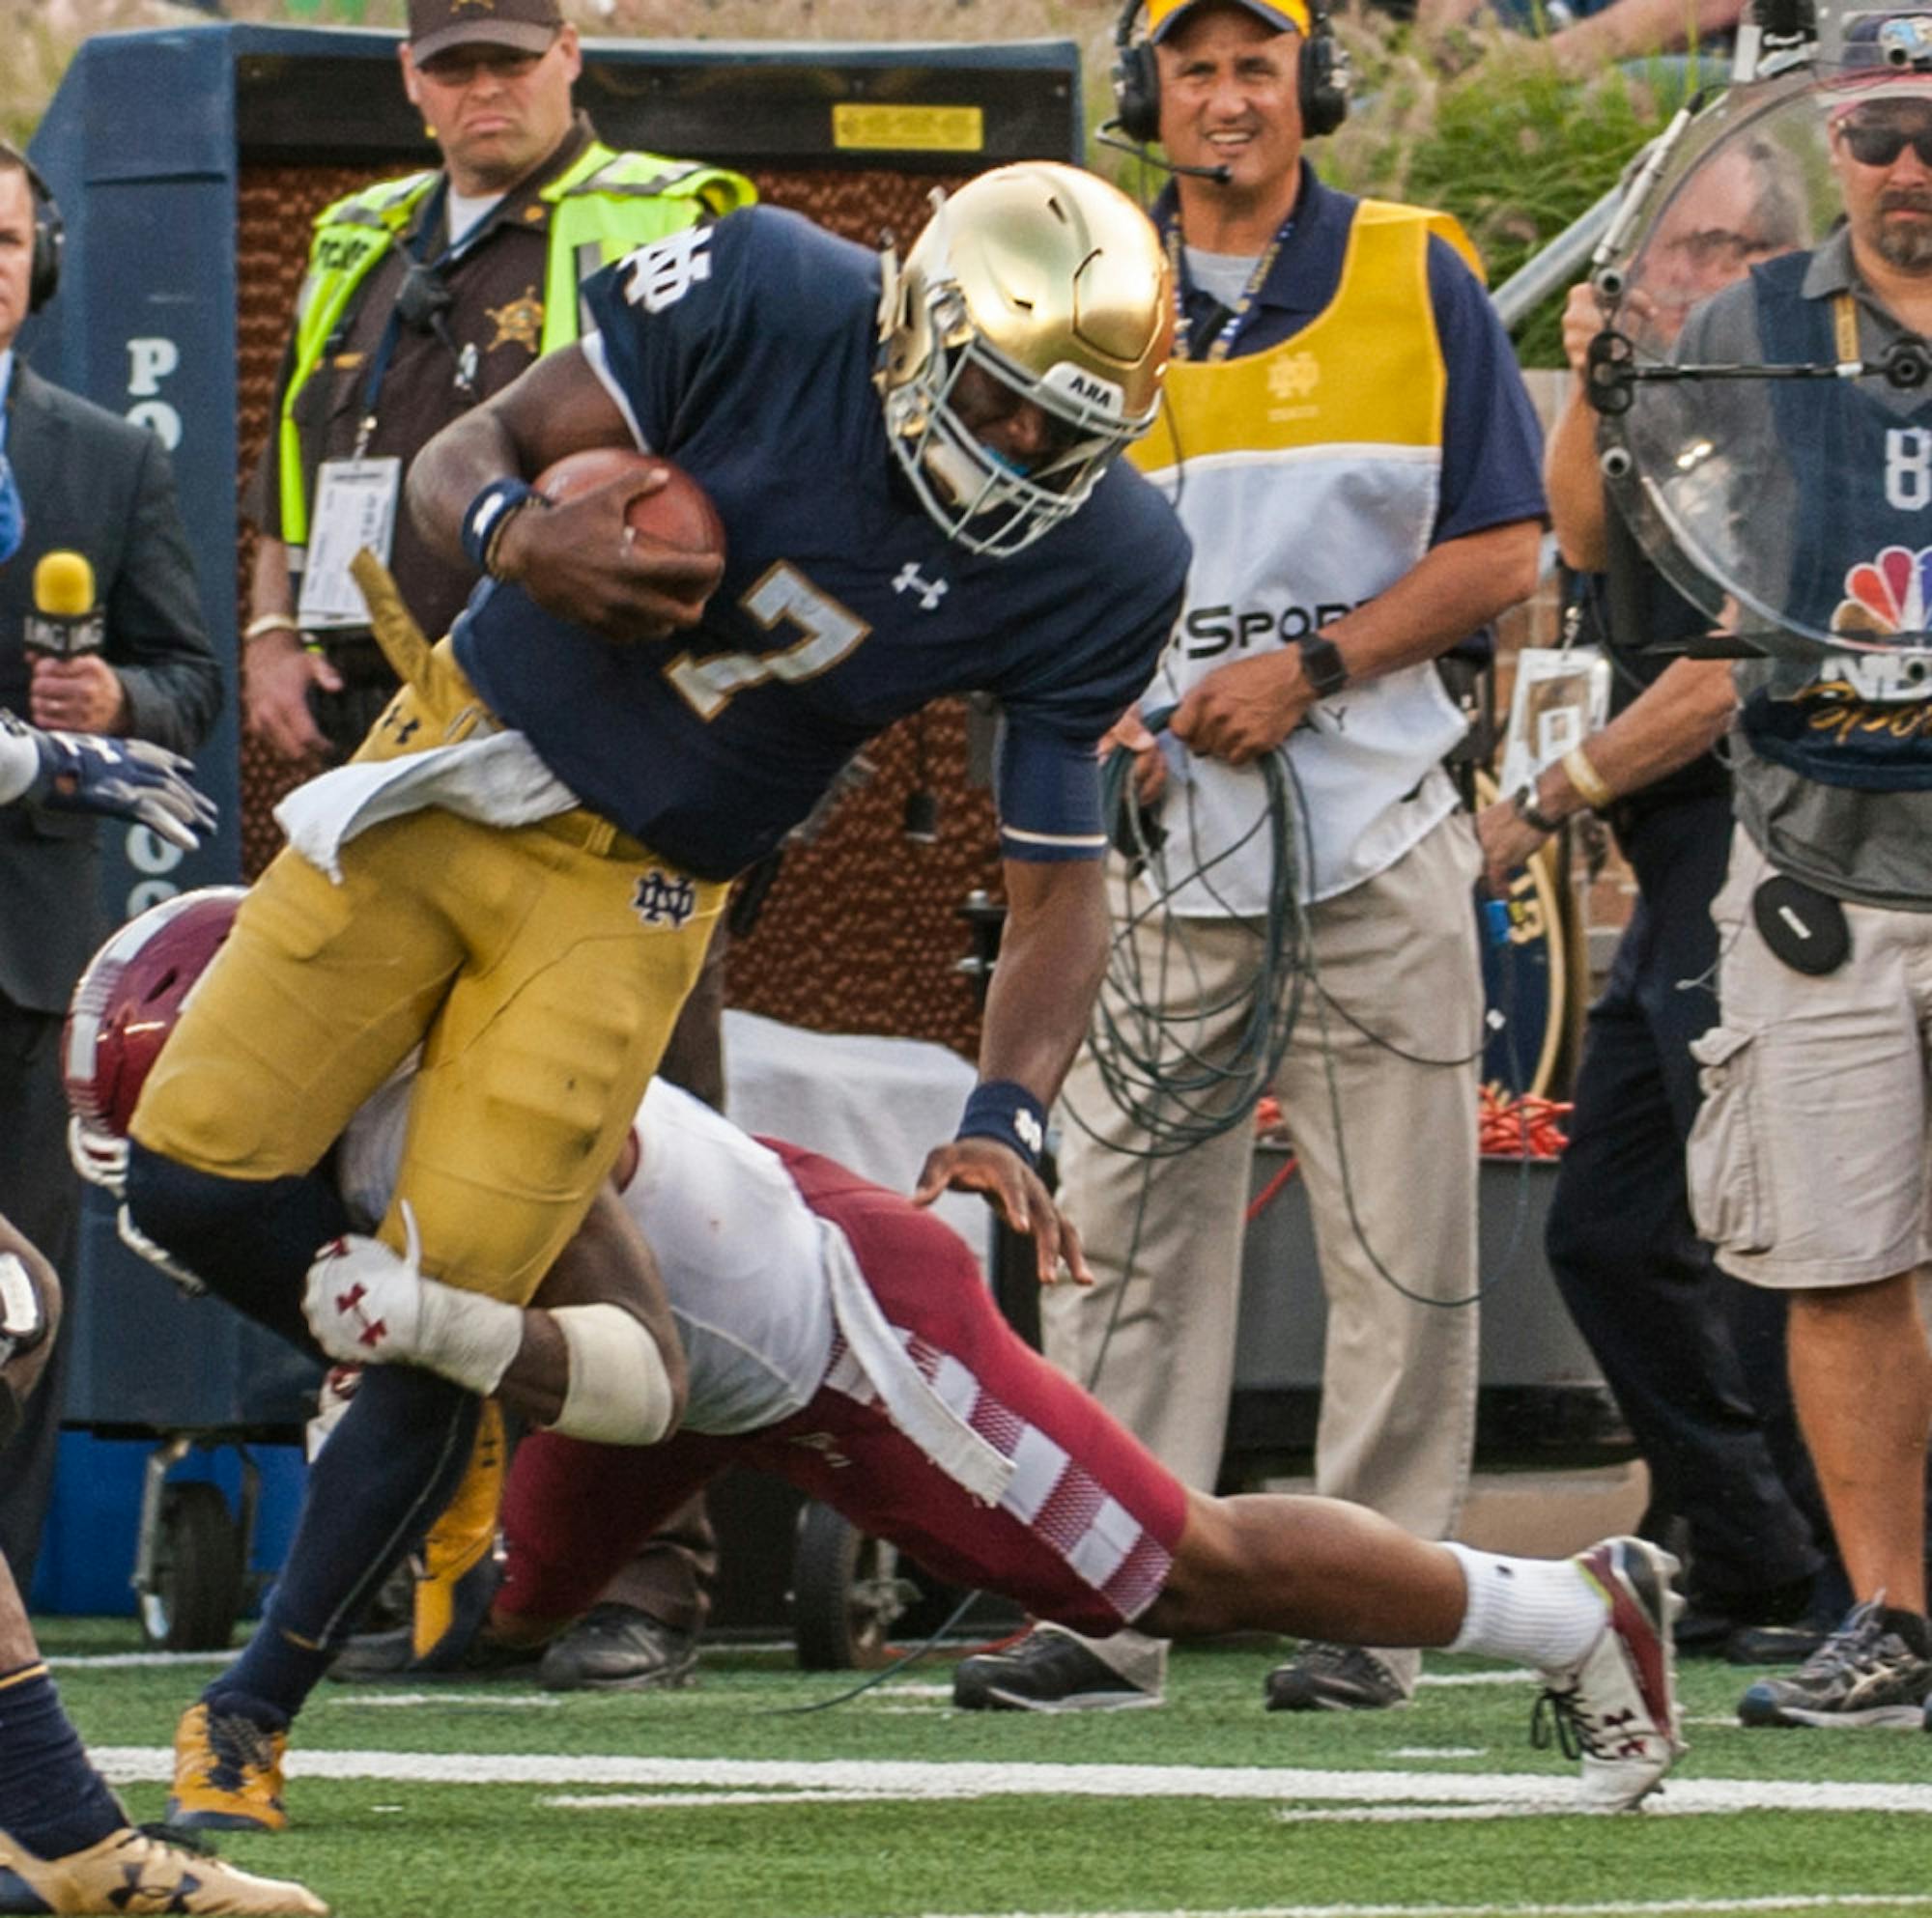 Irish junior quarterback Brandon Wimbush rushes the ball during Notre Dame’s 49-16 win over Temple on Sept. 2 at Notre Dame Stadium. Wimbush rushed for 106 yards against the Owls.